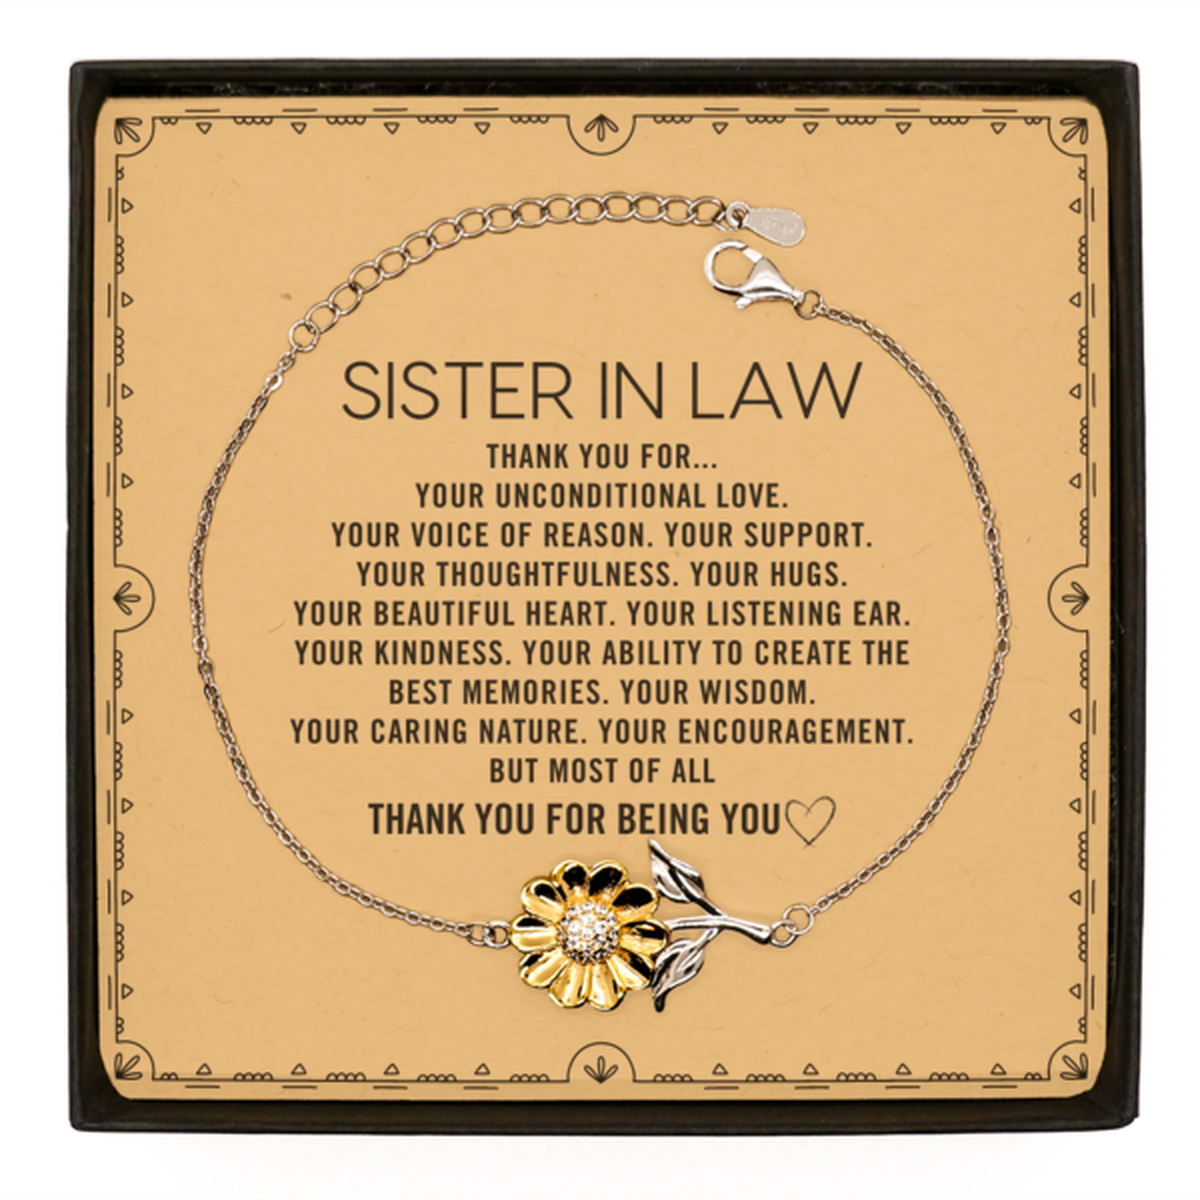 Sister In Law Sunflower Bracelet Custom, Message Card Gifts For Sister In Law Christmas Graduation Birthday Gifts for Men Women Sister In Law Thank you for Your unconditional love